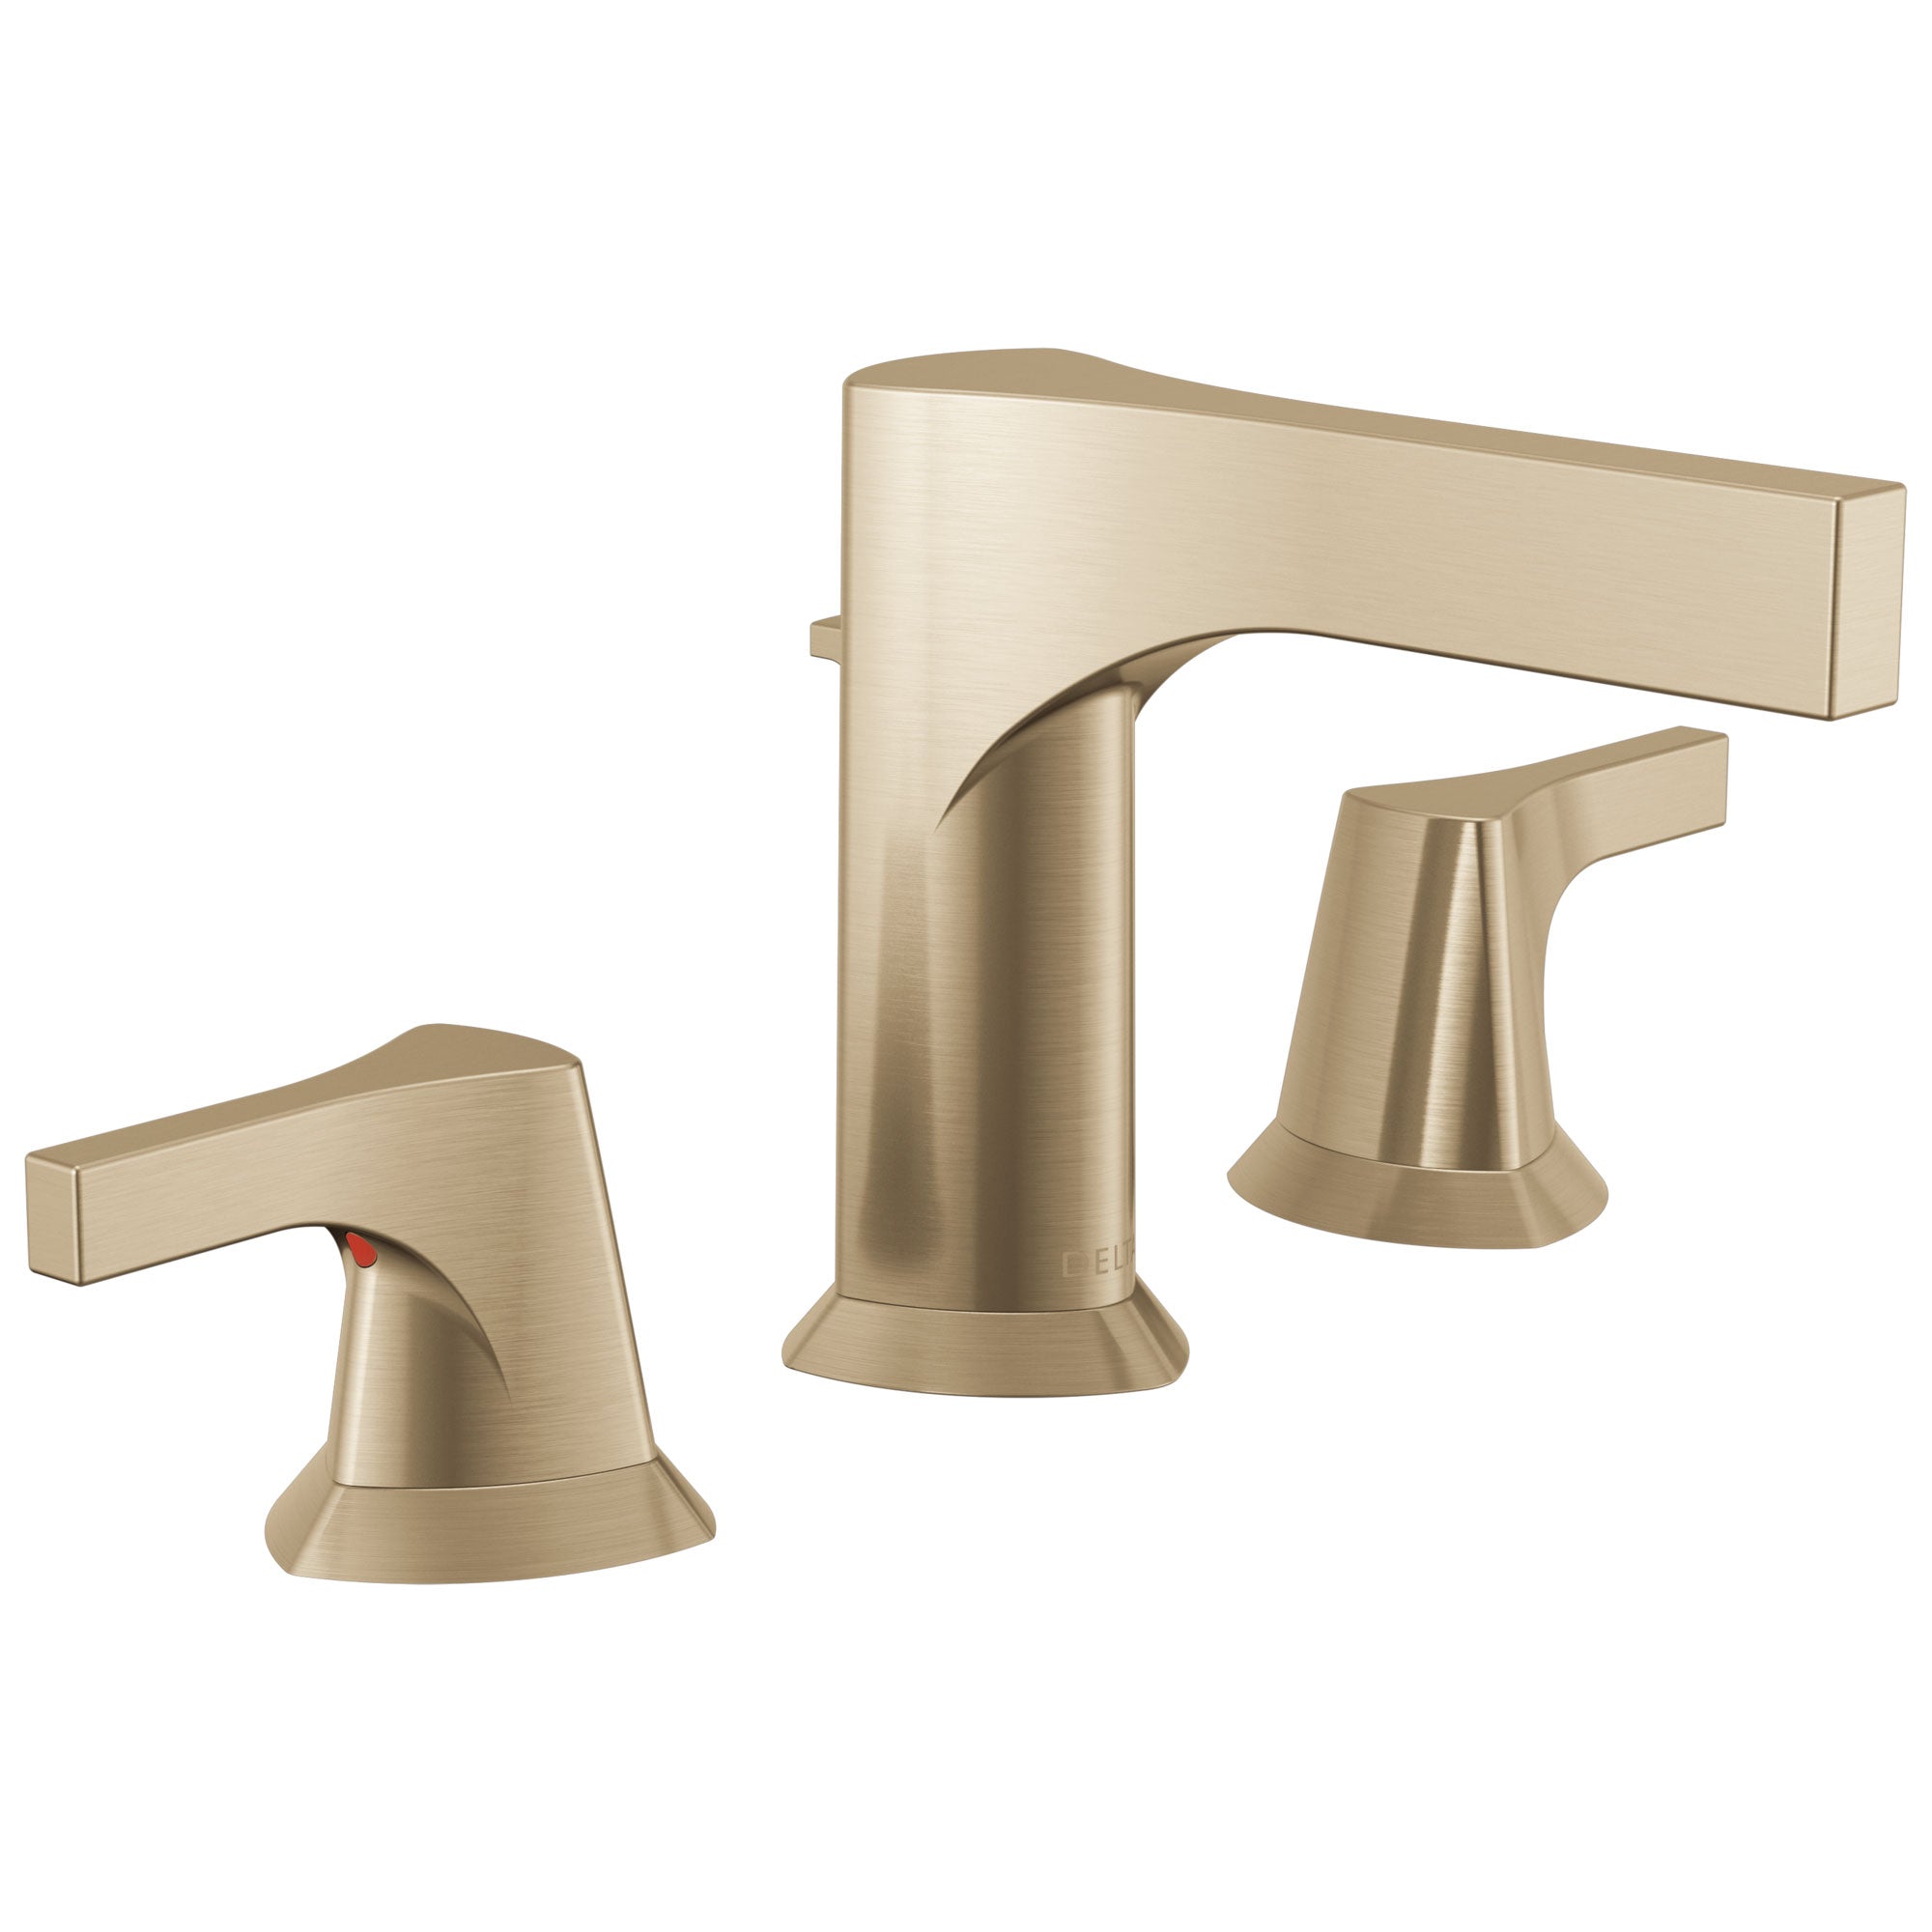 Delta Zura Champagne Bronze Finish Two Handle Widespread Bathroom Faucet with Drain D3574CZMPUDST